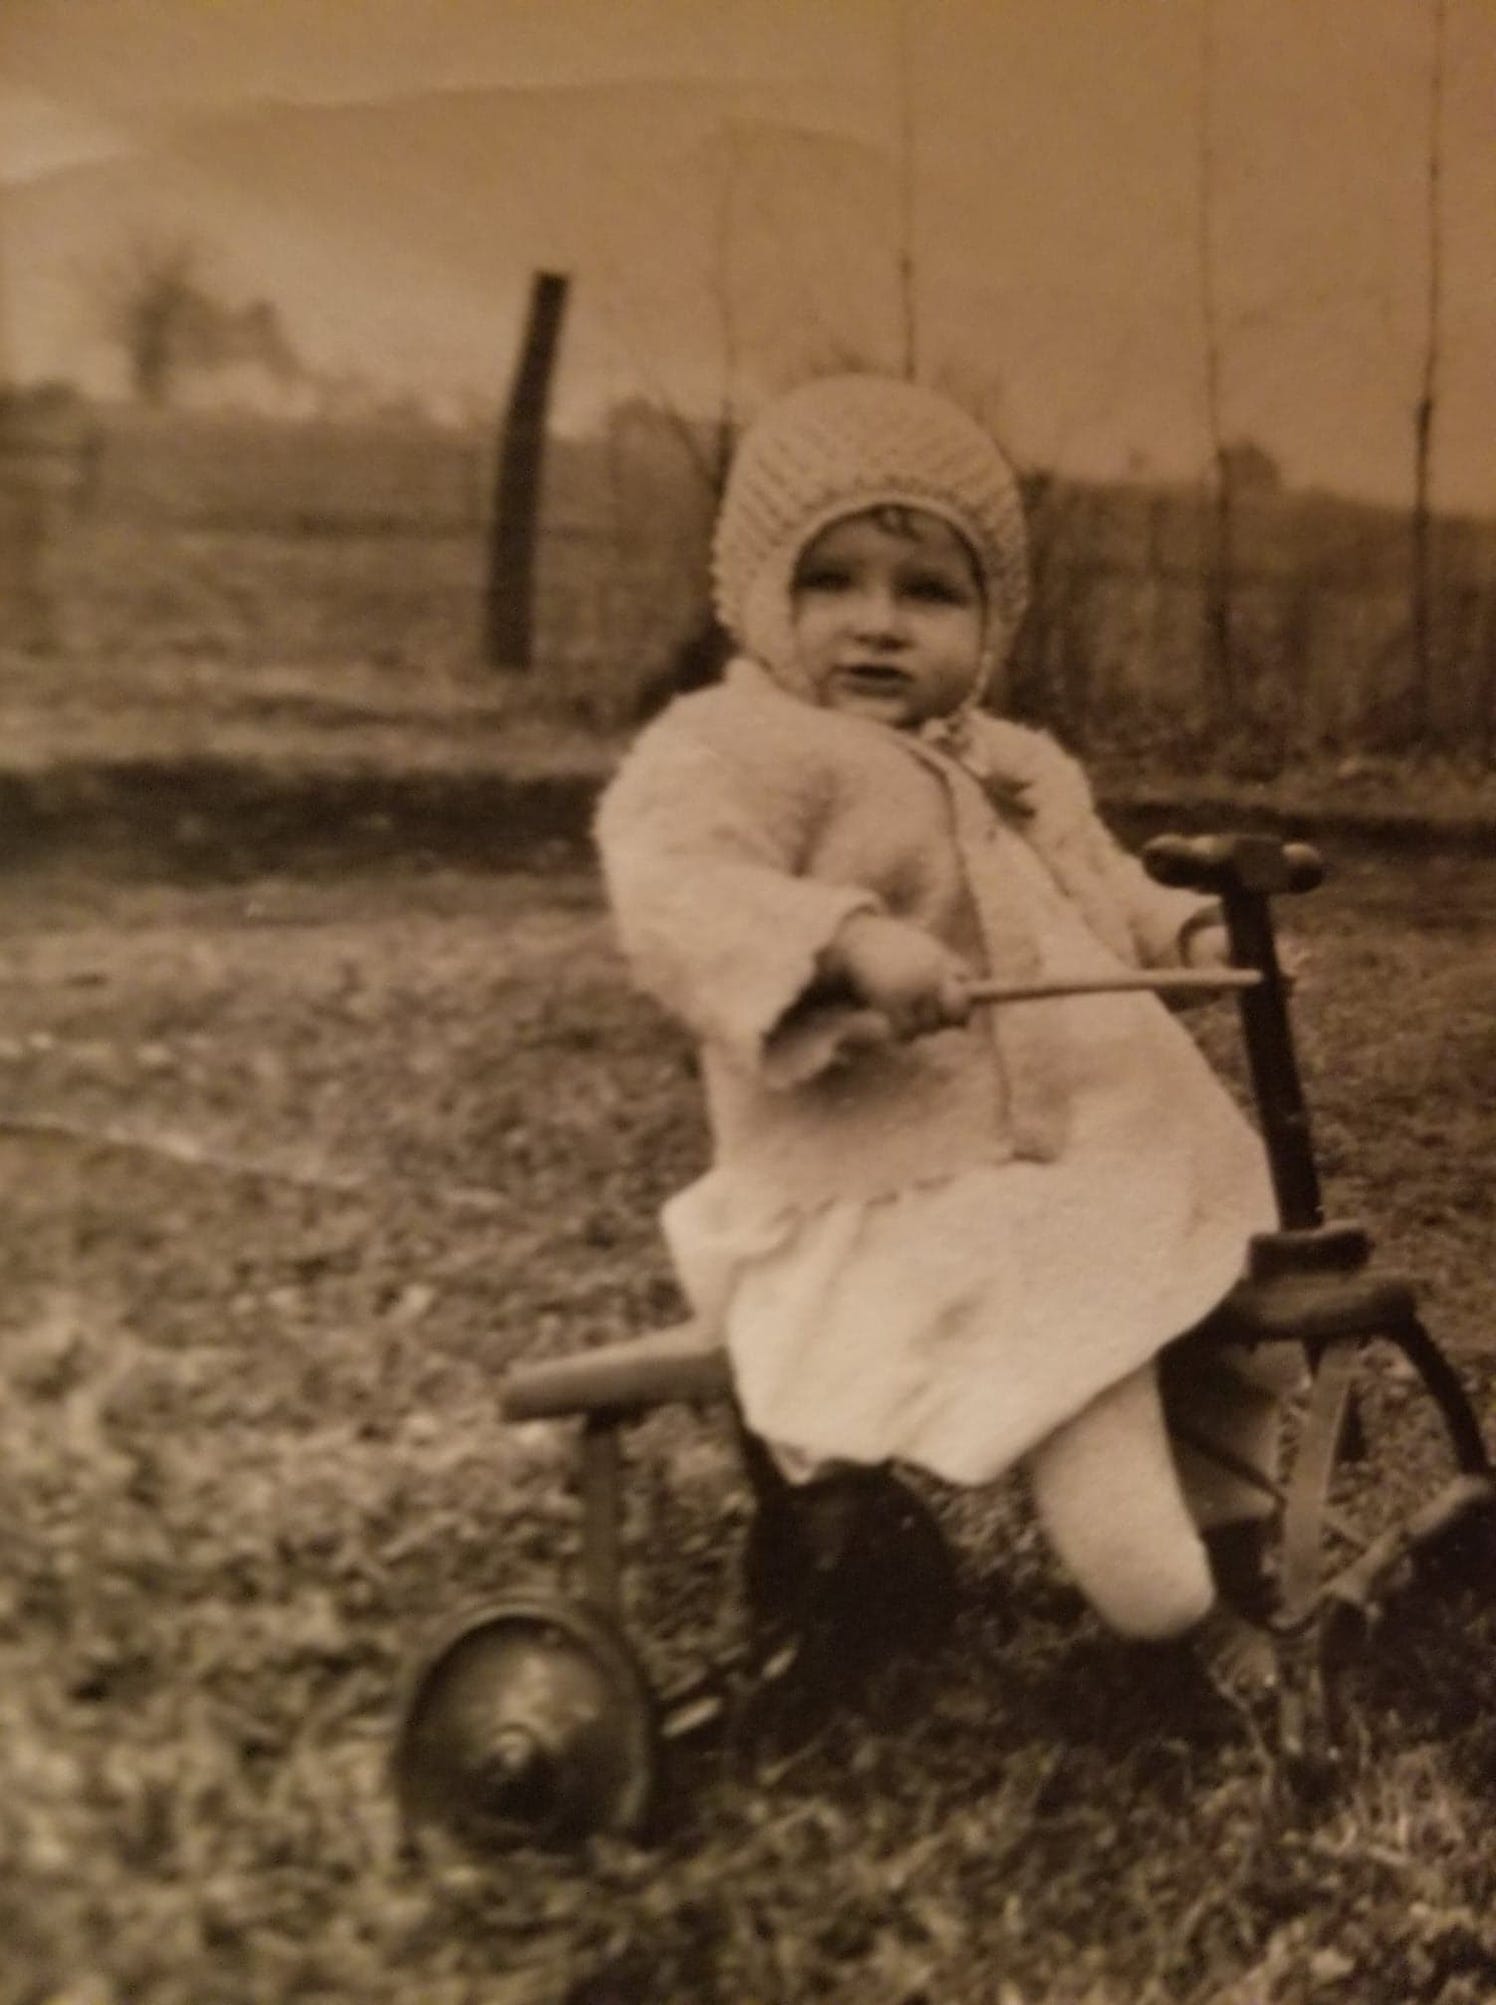 Infant Wilma Lamoreaux was left on doorstep of a Richland County Ohio home in 1925